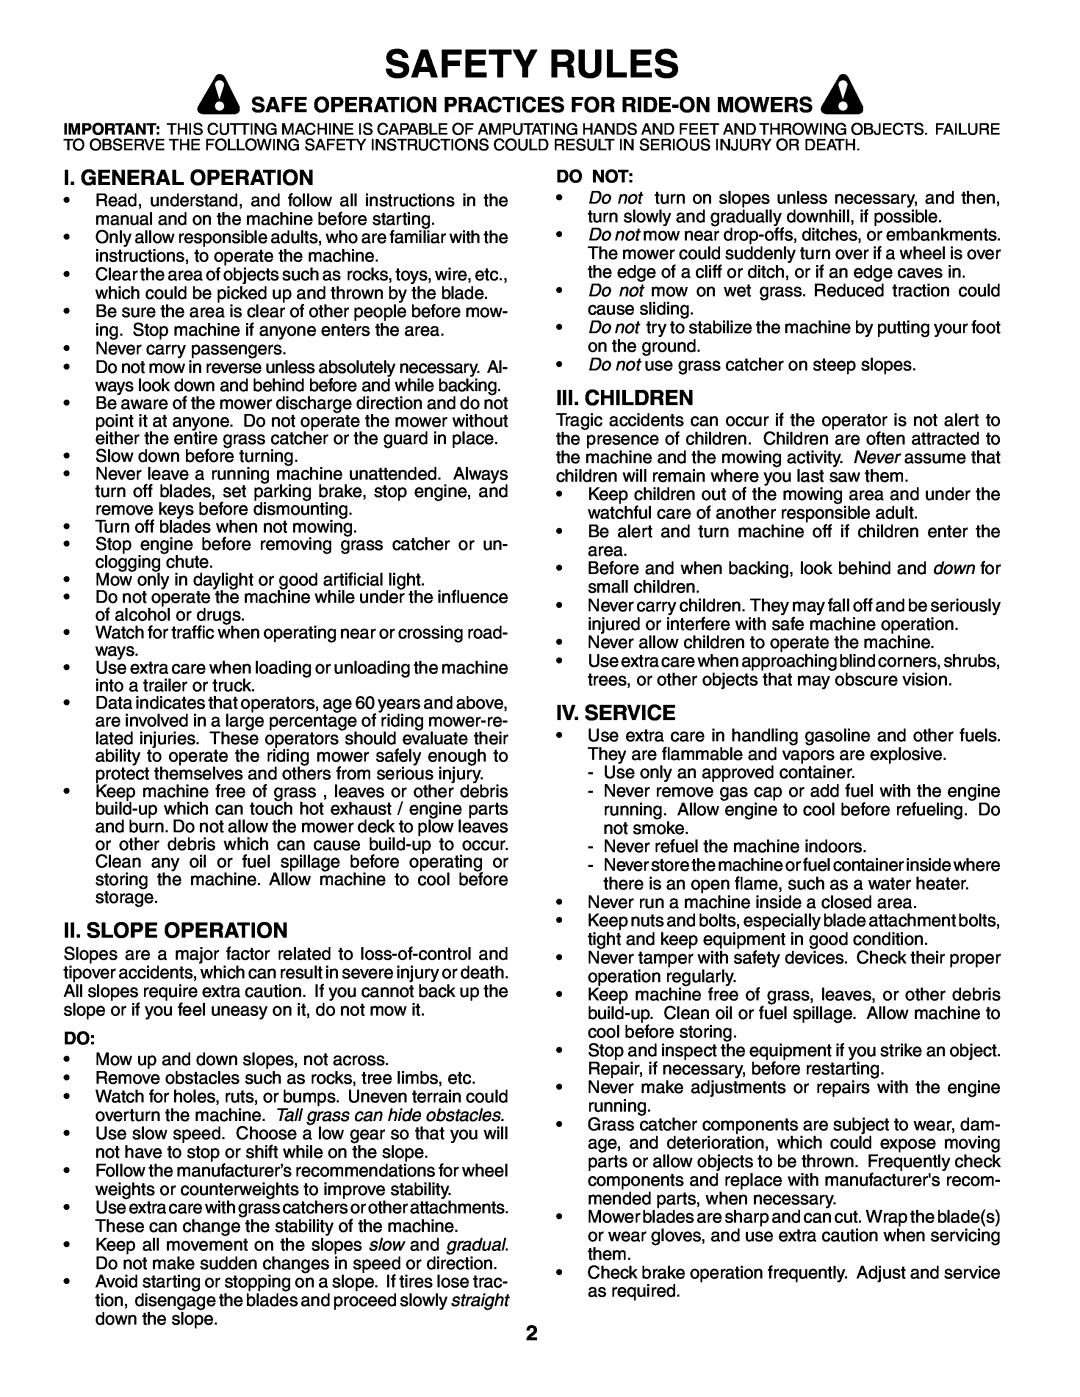 Poulan 187301 manual Safety Rules, Safe Operation Practices For Ride-On Mowers, I. General Operation, Ii. Slope Operation 